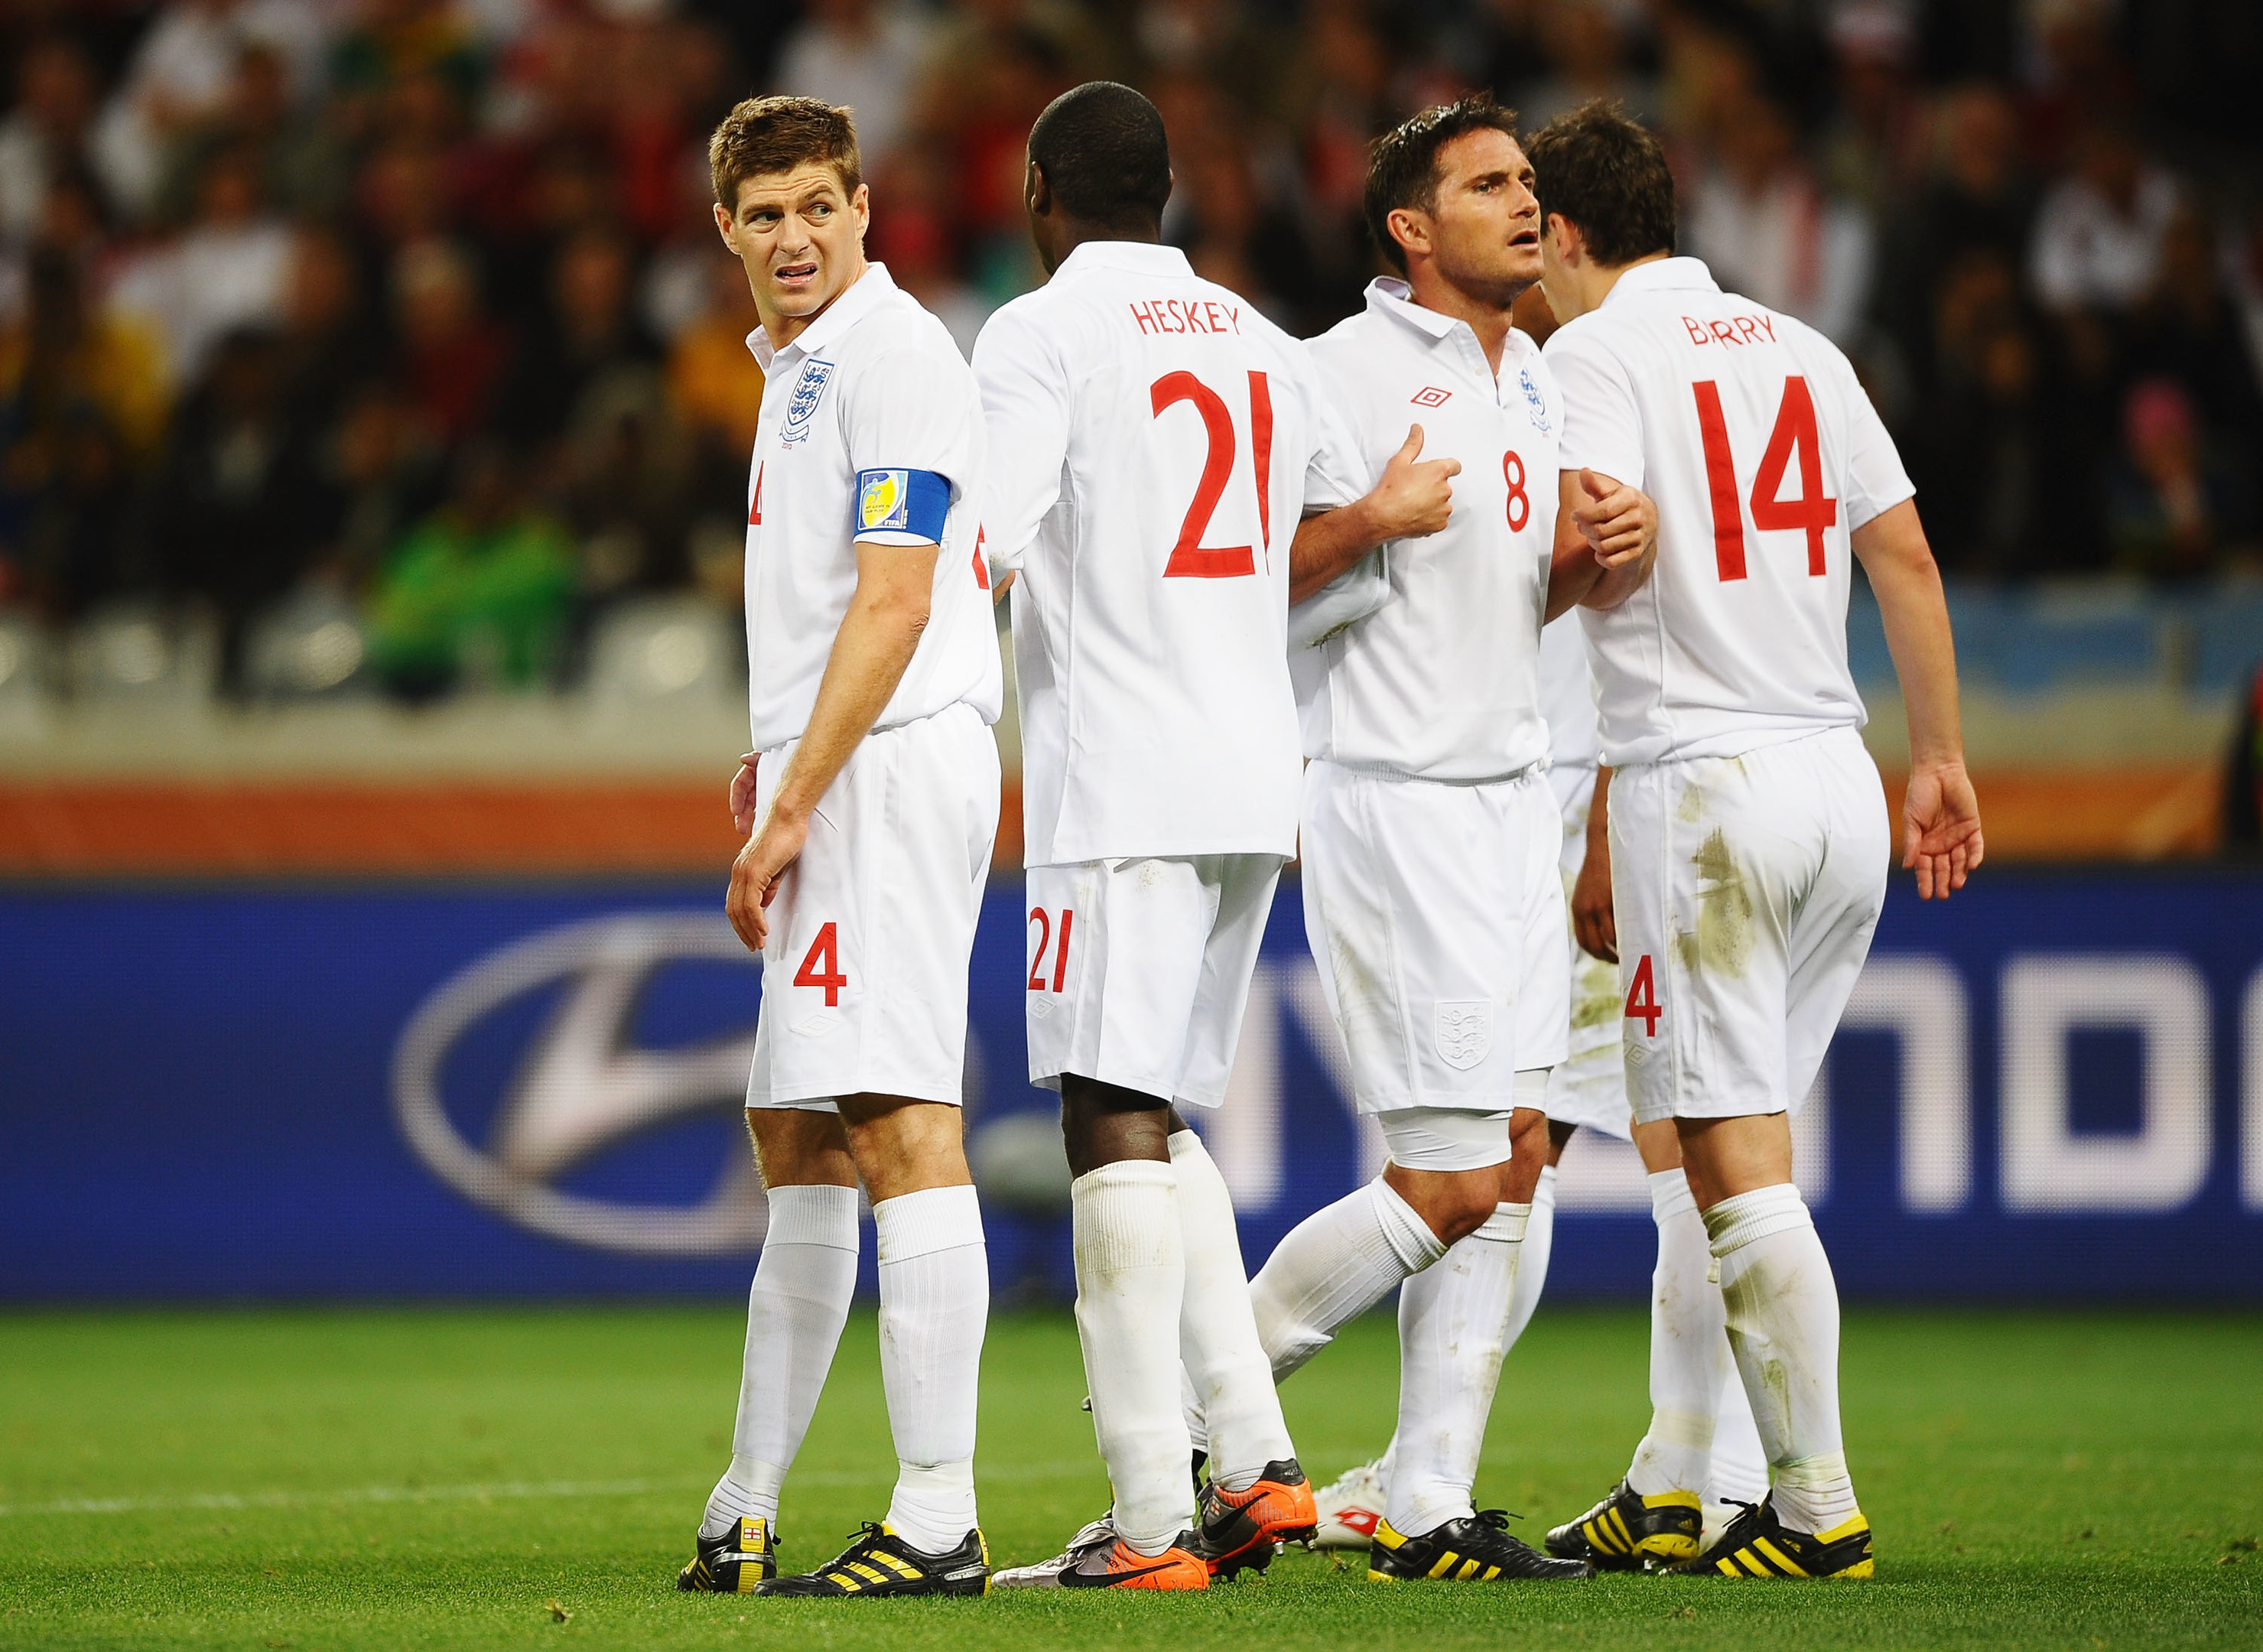 Steven Gerrard, Emile Heskey, Frank Lampard and Gareth Barry of England line up in a wall during the 2010 FIFA World Cup (Laurence Griffiths/Getty Images)